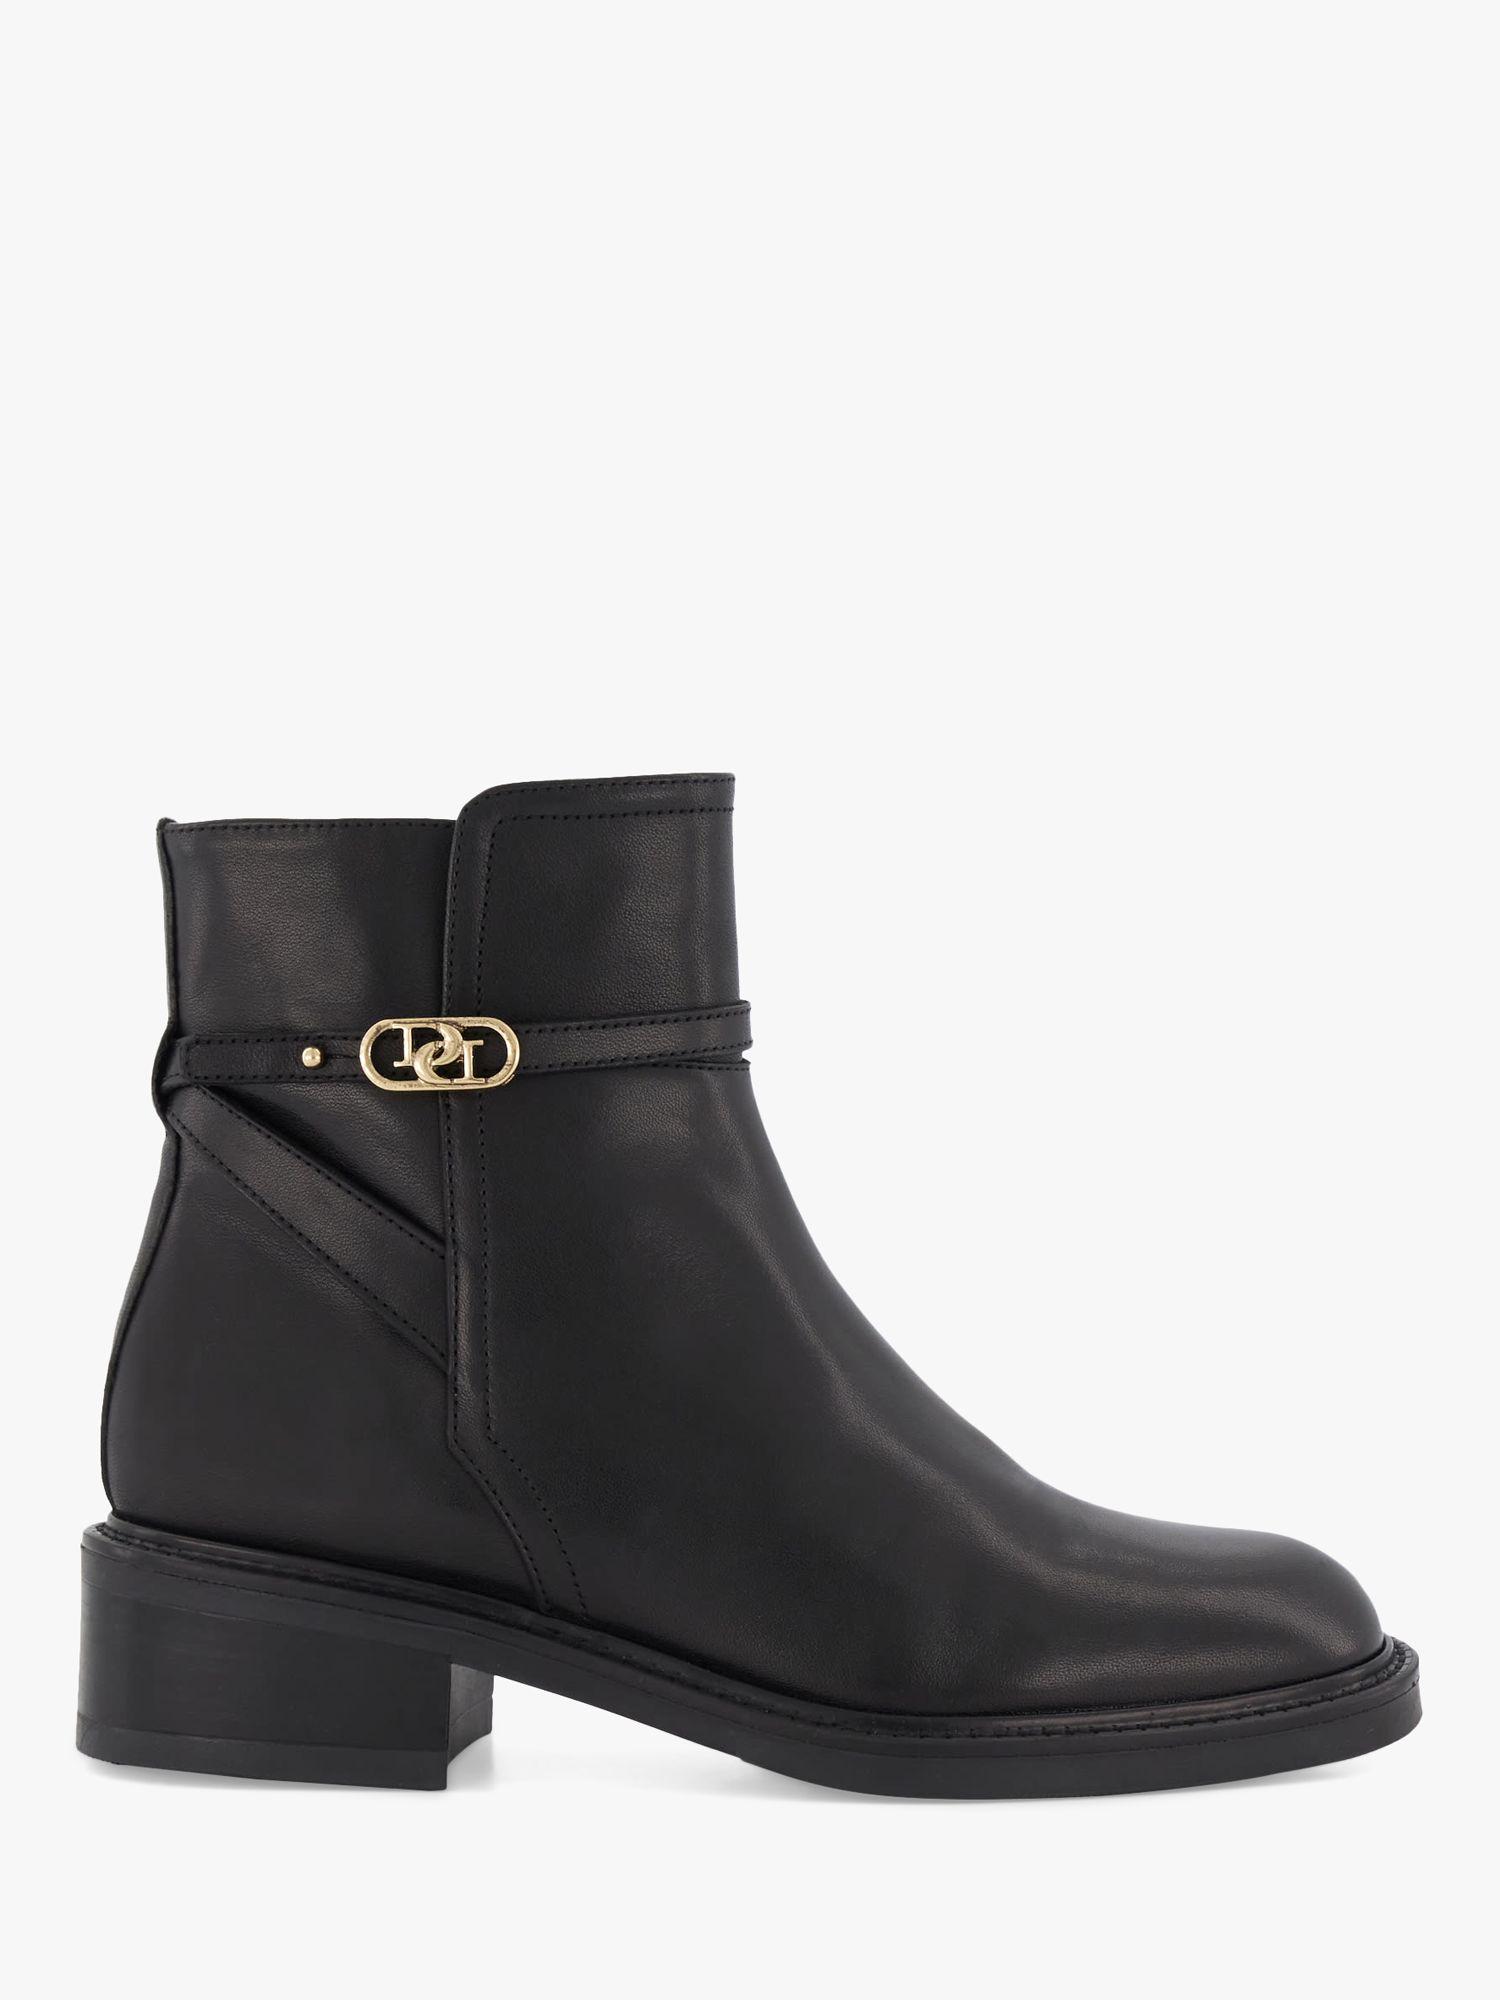 Dune Praising Leather Ankle Boots, Black at John Lewis & Partners